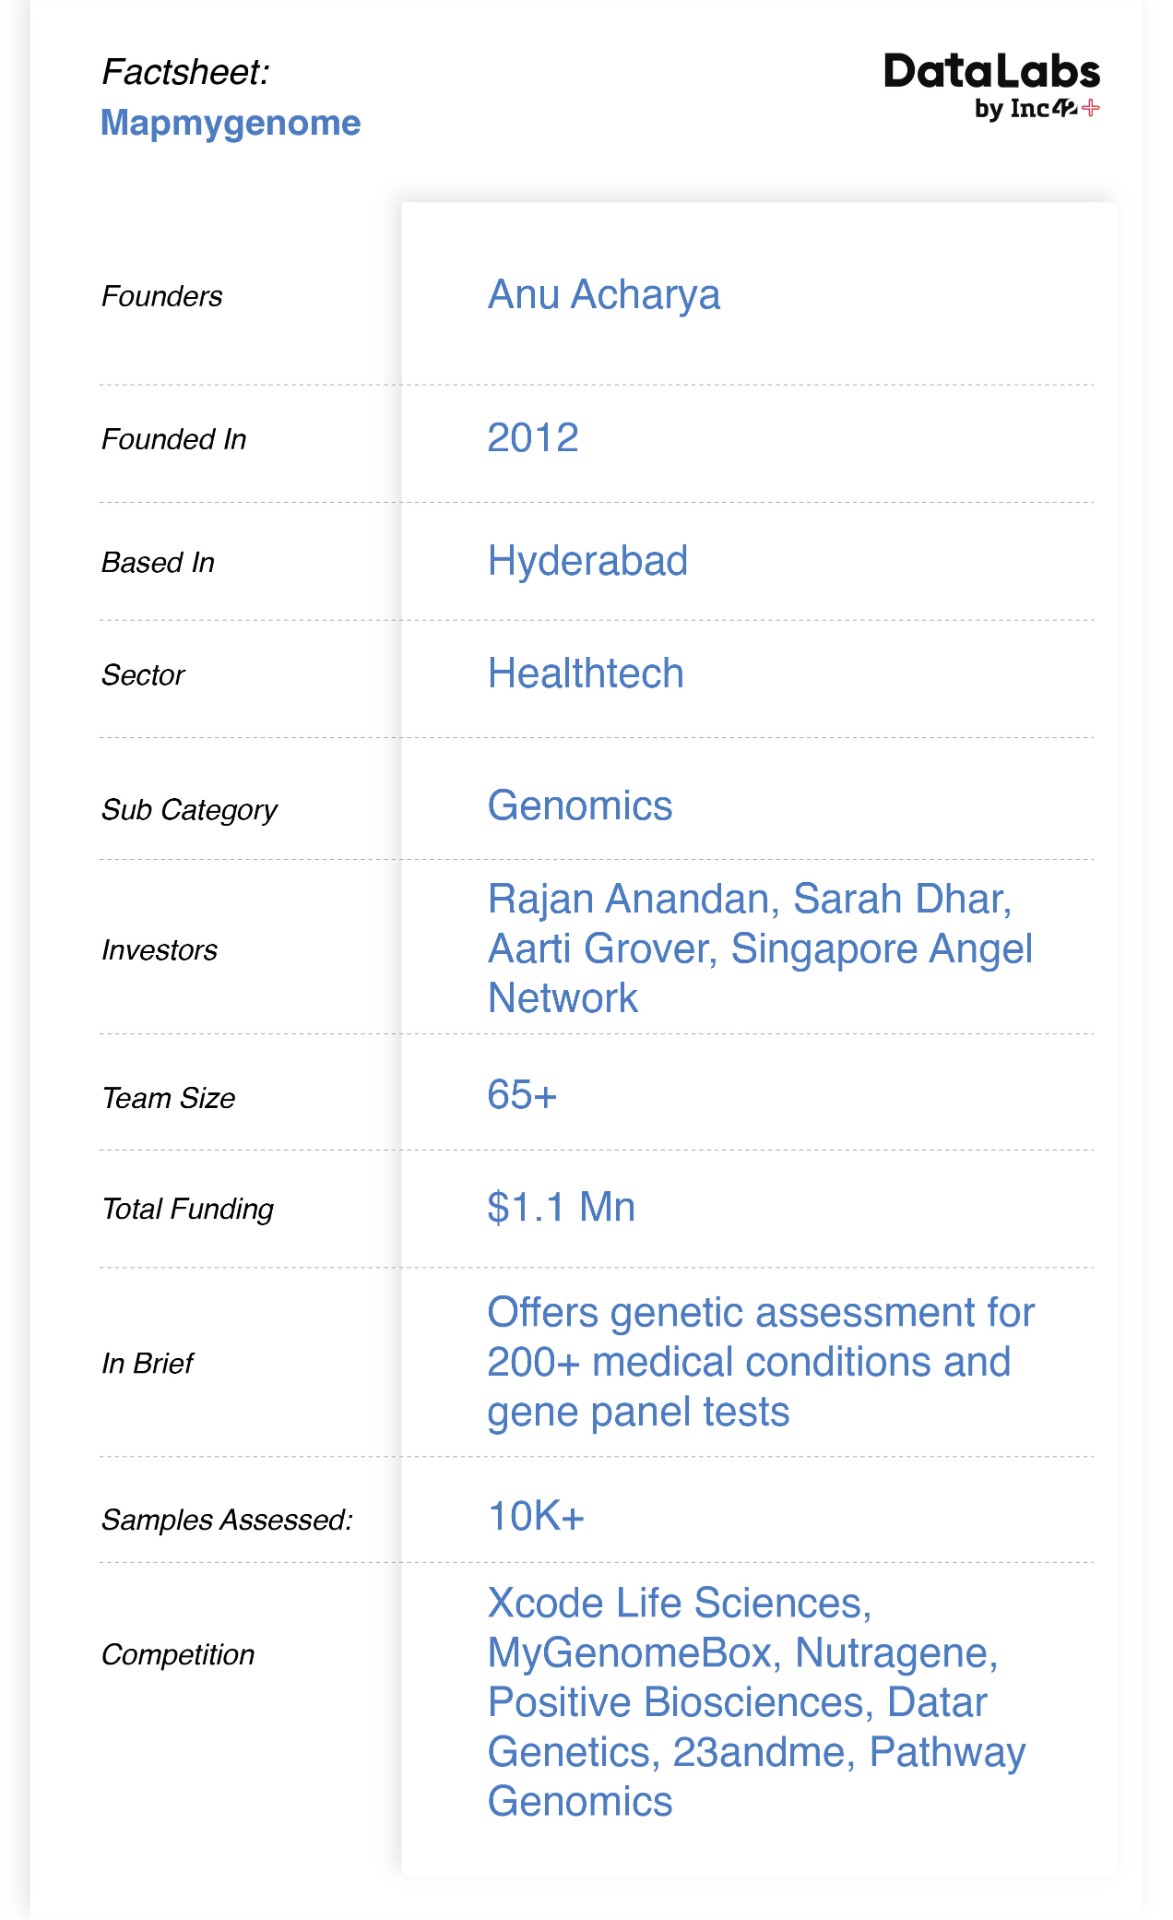 Mapmygenome Vs Covid-19: Is Gene Mapping The Answer?